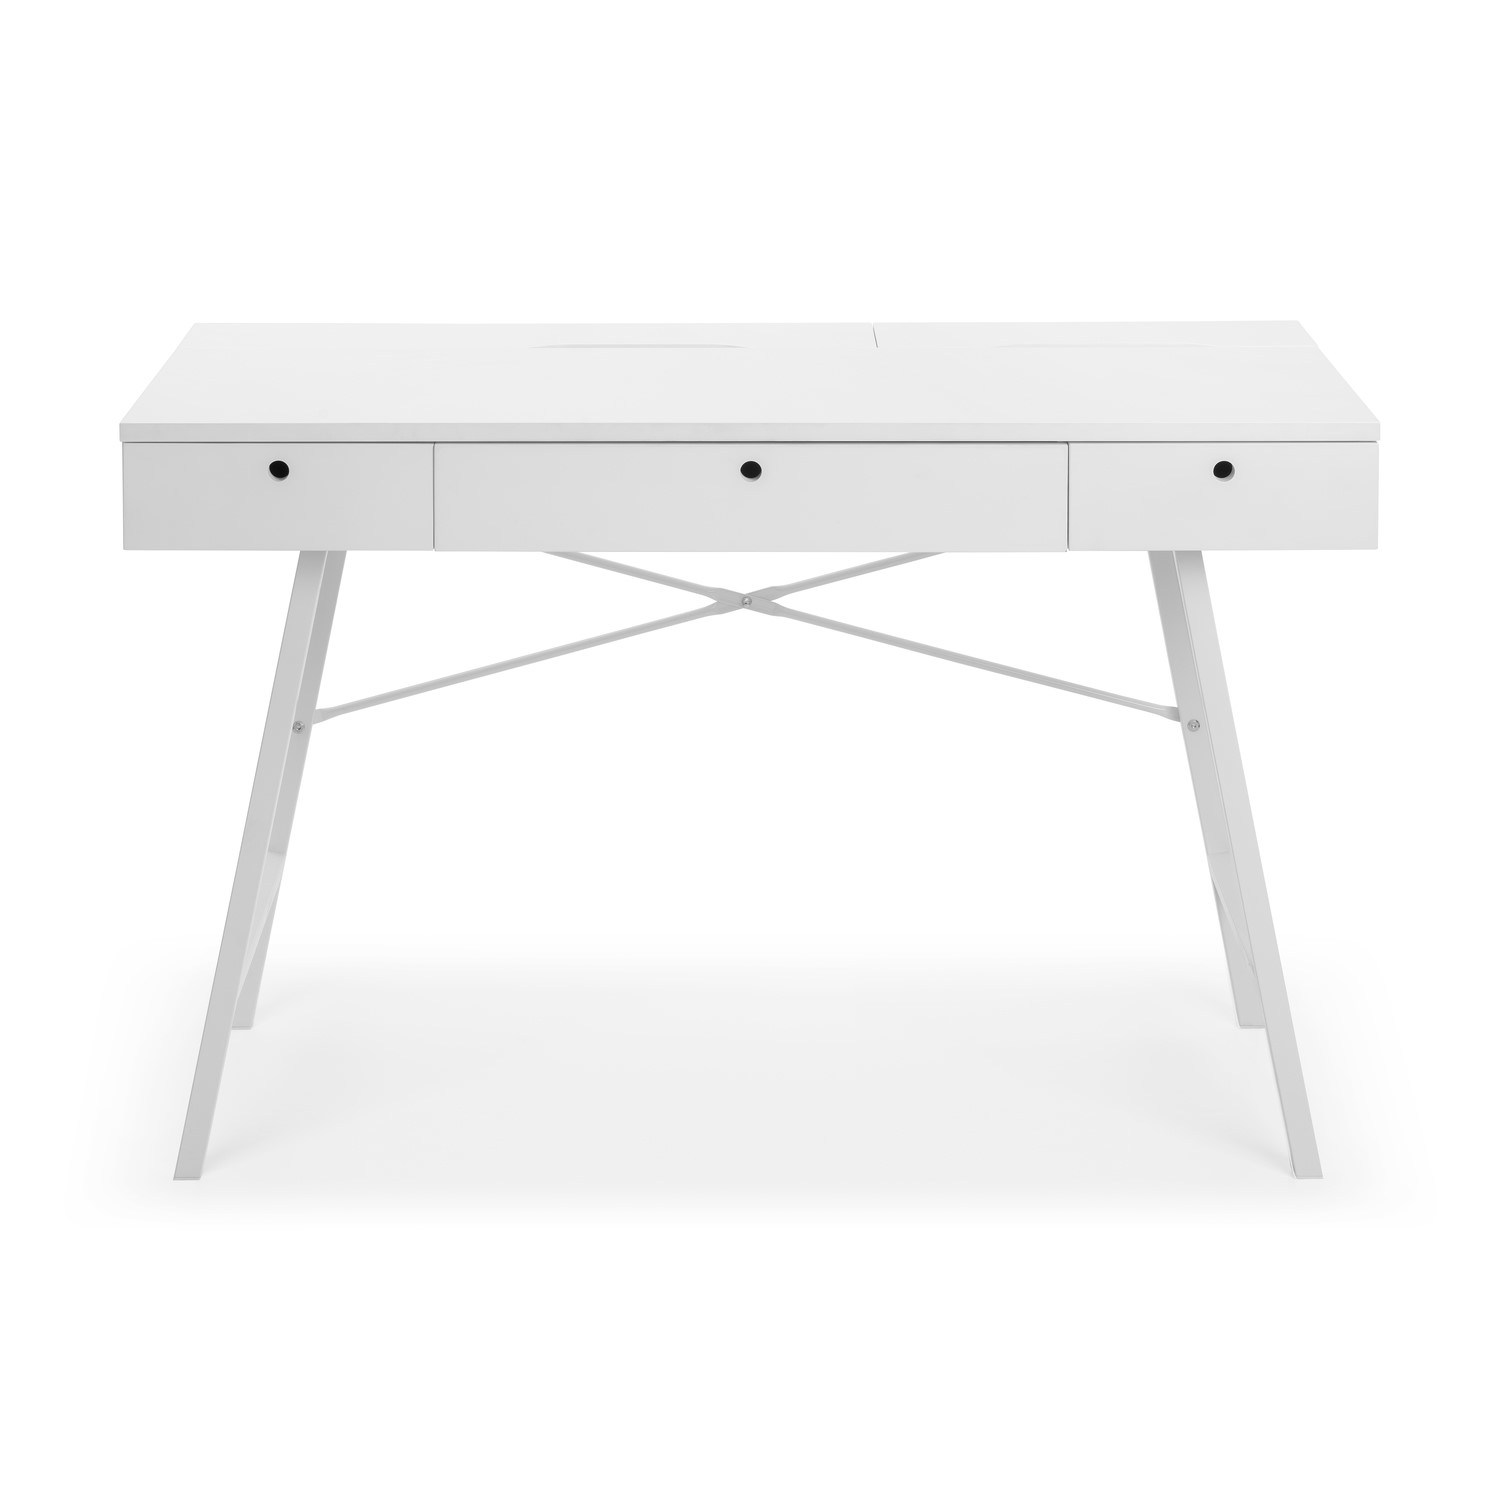 Read more about White painted wooden office desk with 3 drawers julian bowen